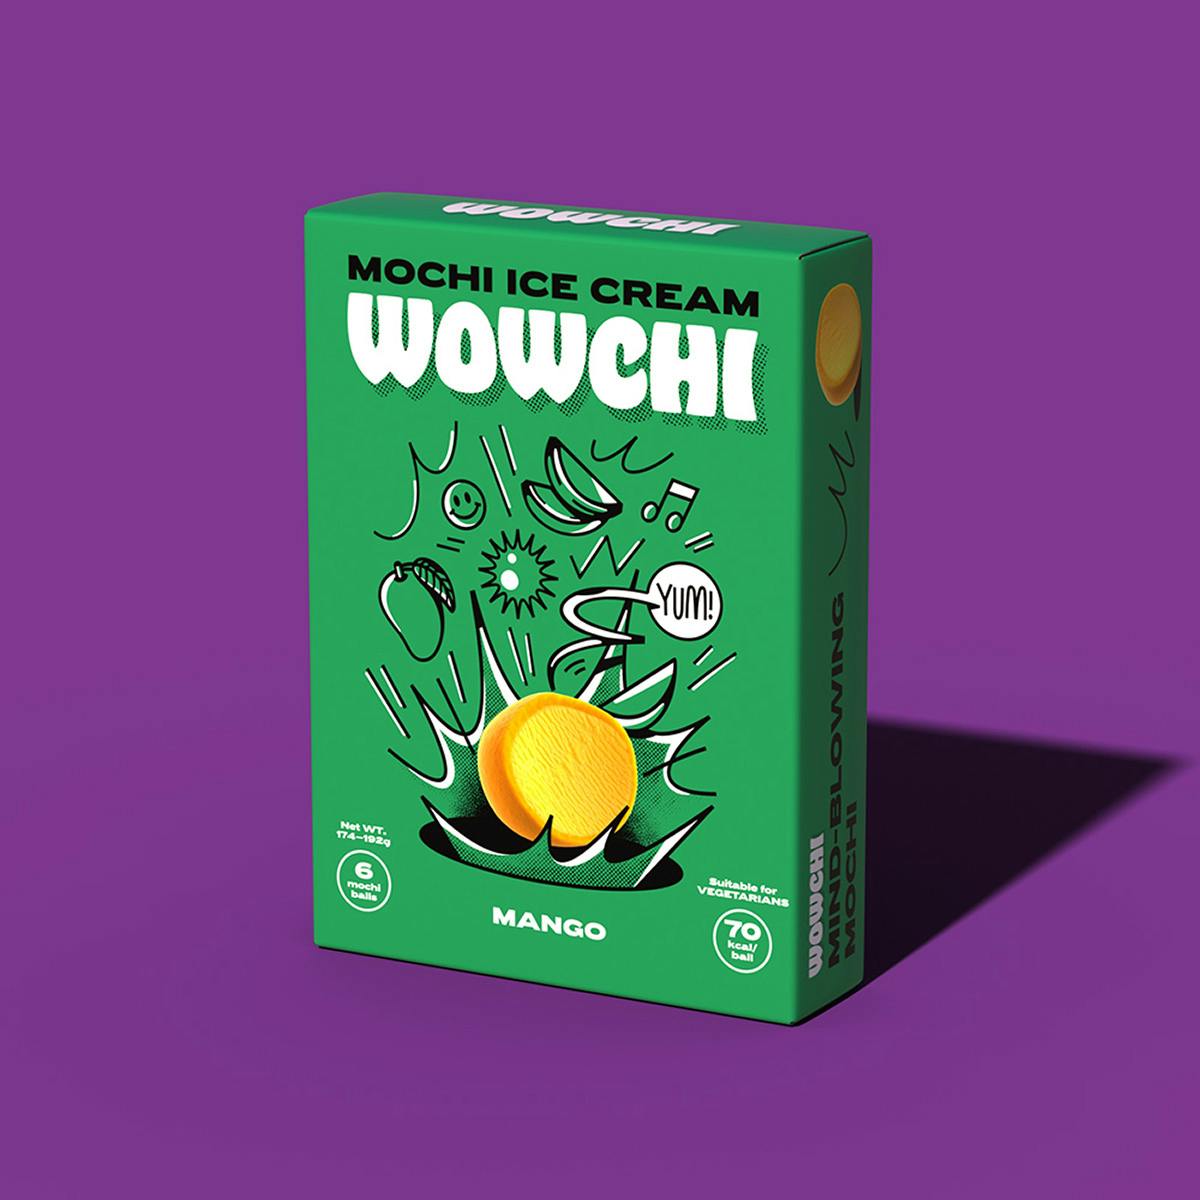 Image shows a green box of Wowchi mochi with line illustrations and a picture of a mochi ball on the front, shown against a purple background